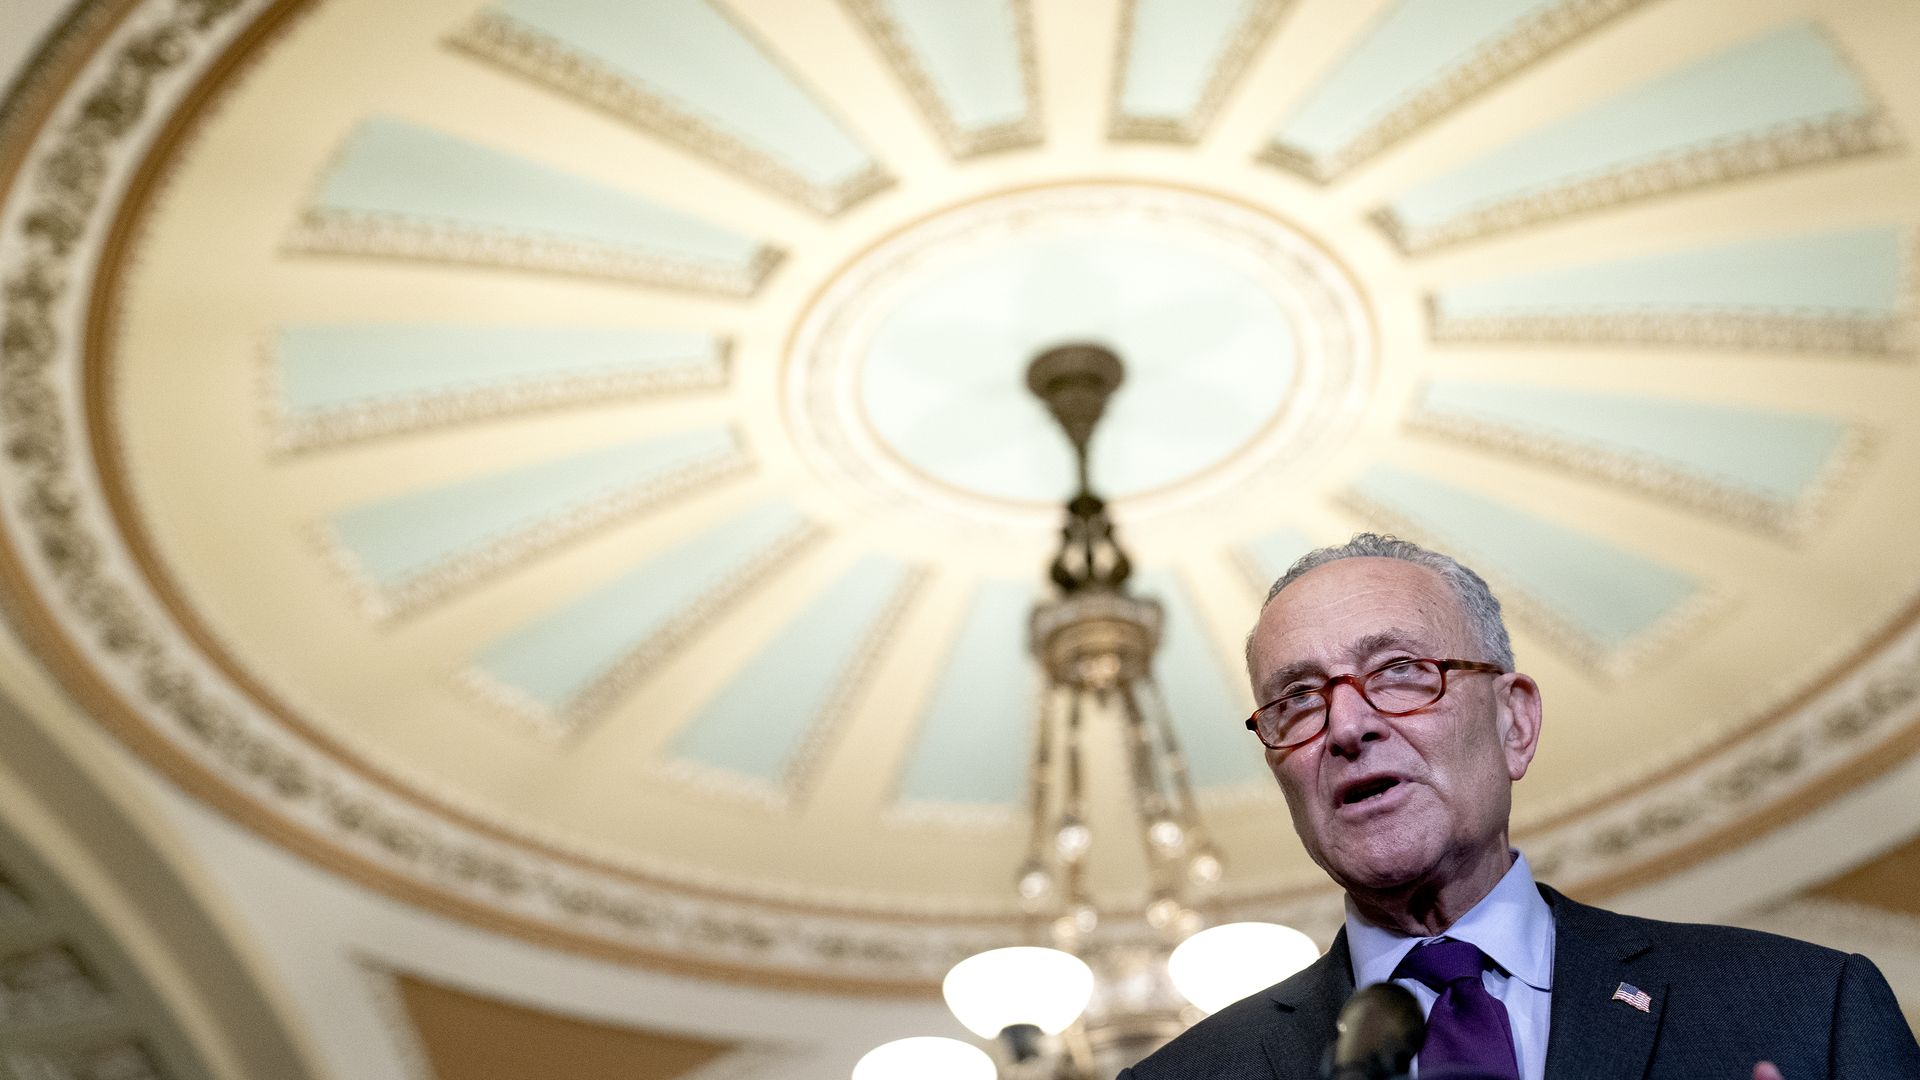 Senate Majority Leader Chuck Schumer is seen addressing reporters on Tuesday.